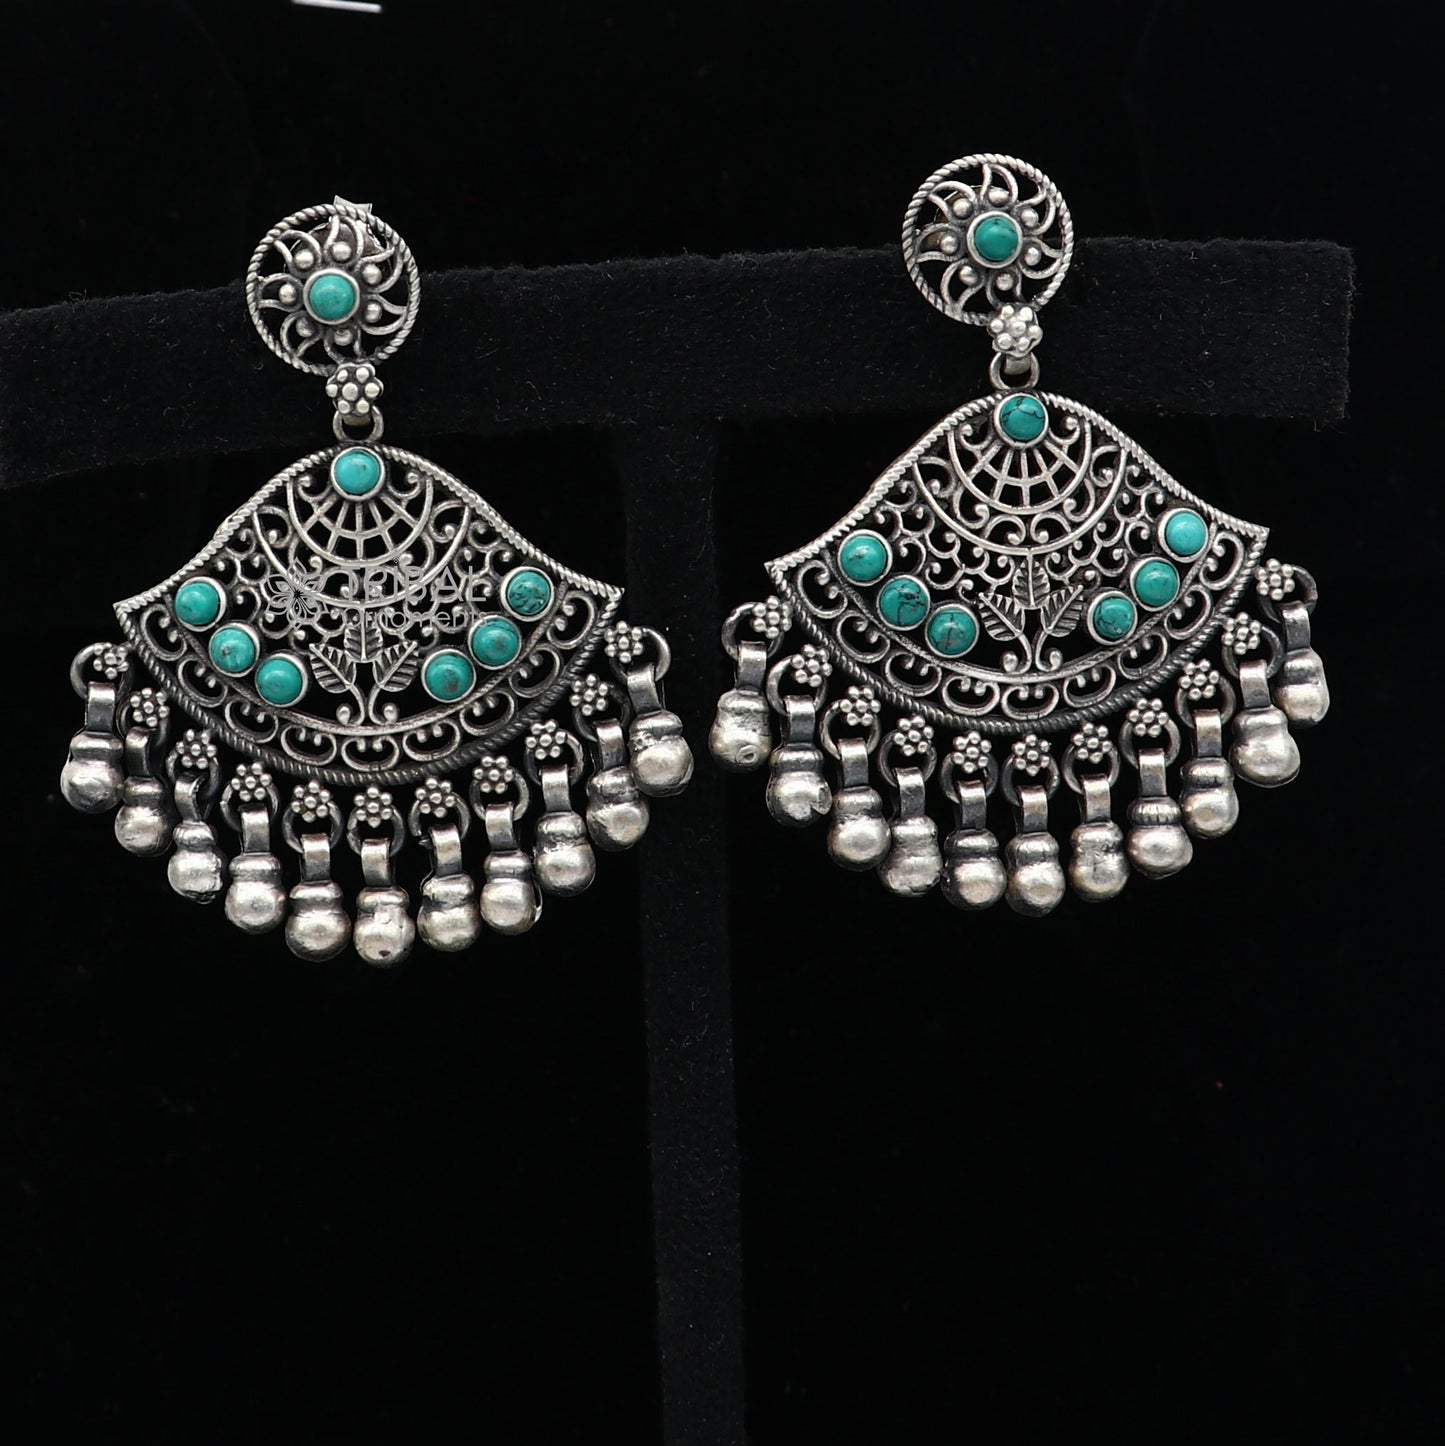 925 sterling silver handmade floral design turquoise stone stud earrings with hanging bells Ghungroo ethnic brides functional jewelry s1234 - TRIBAL ORNAMENTS